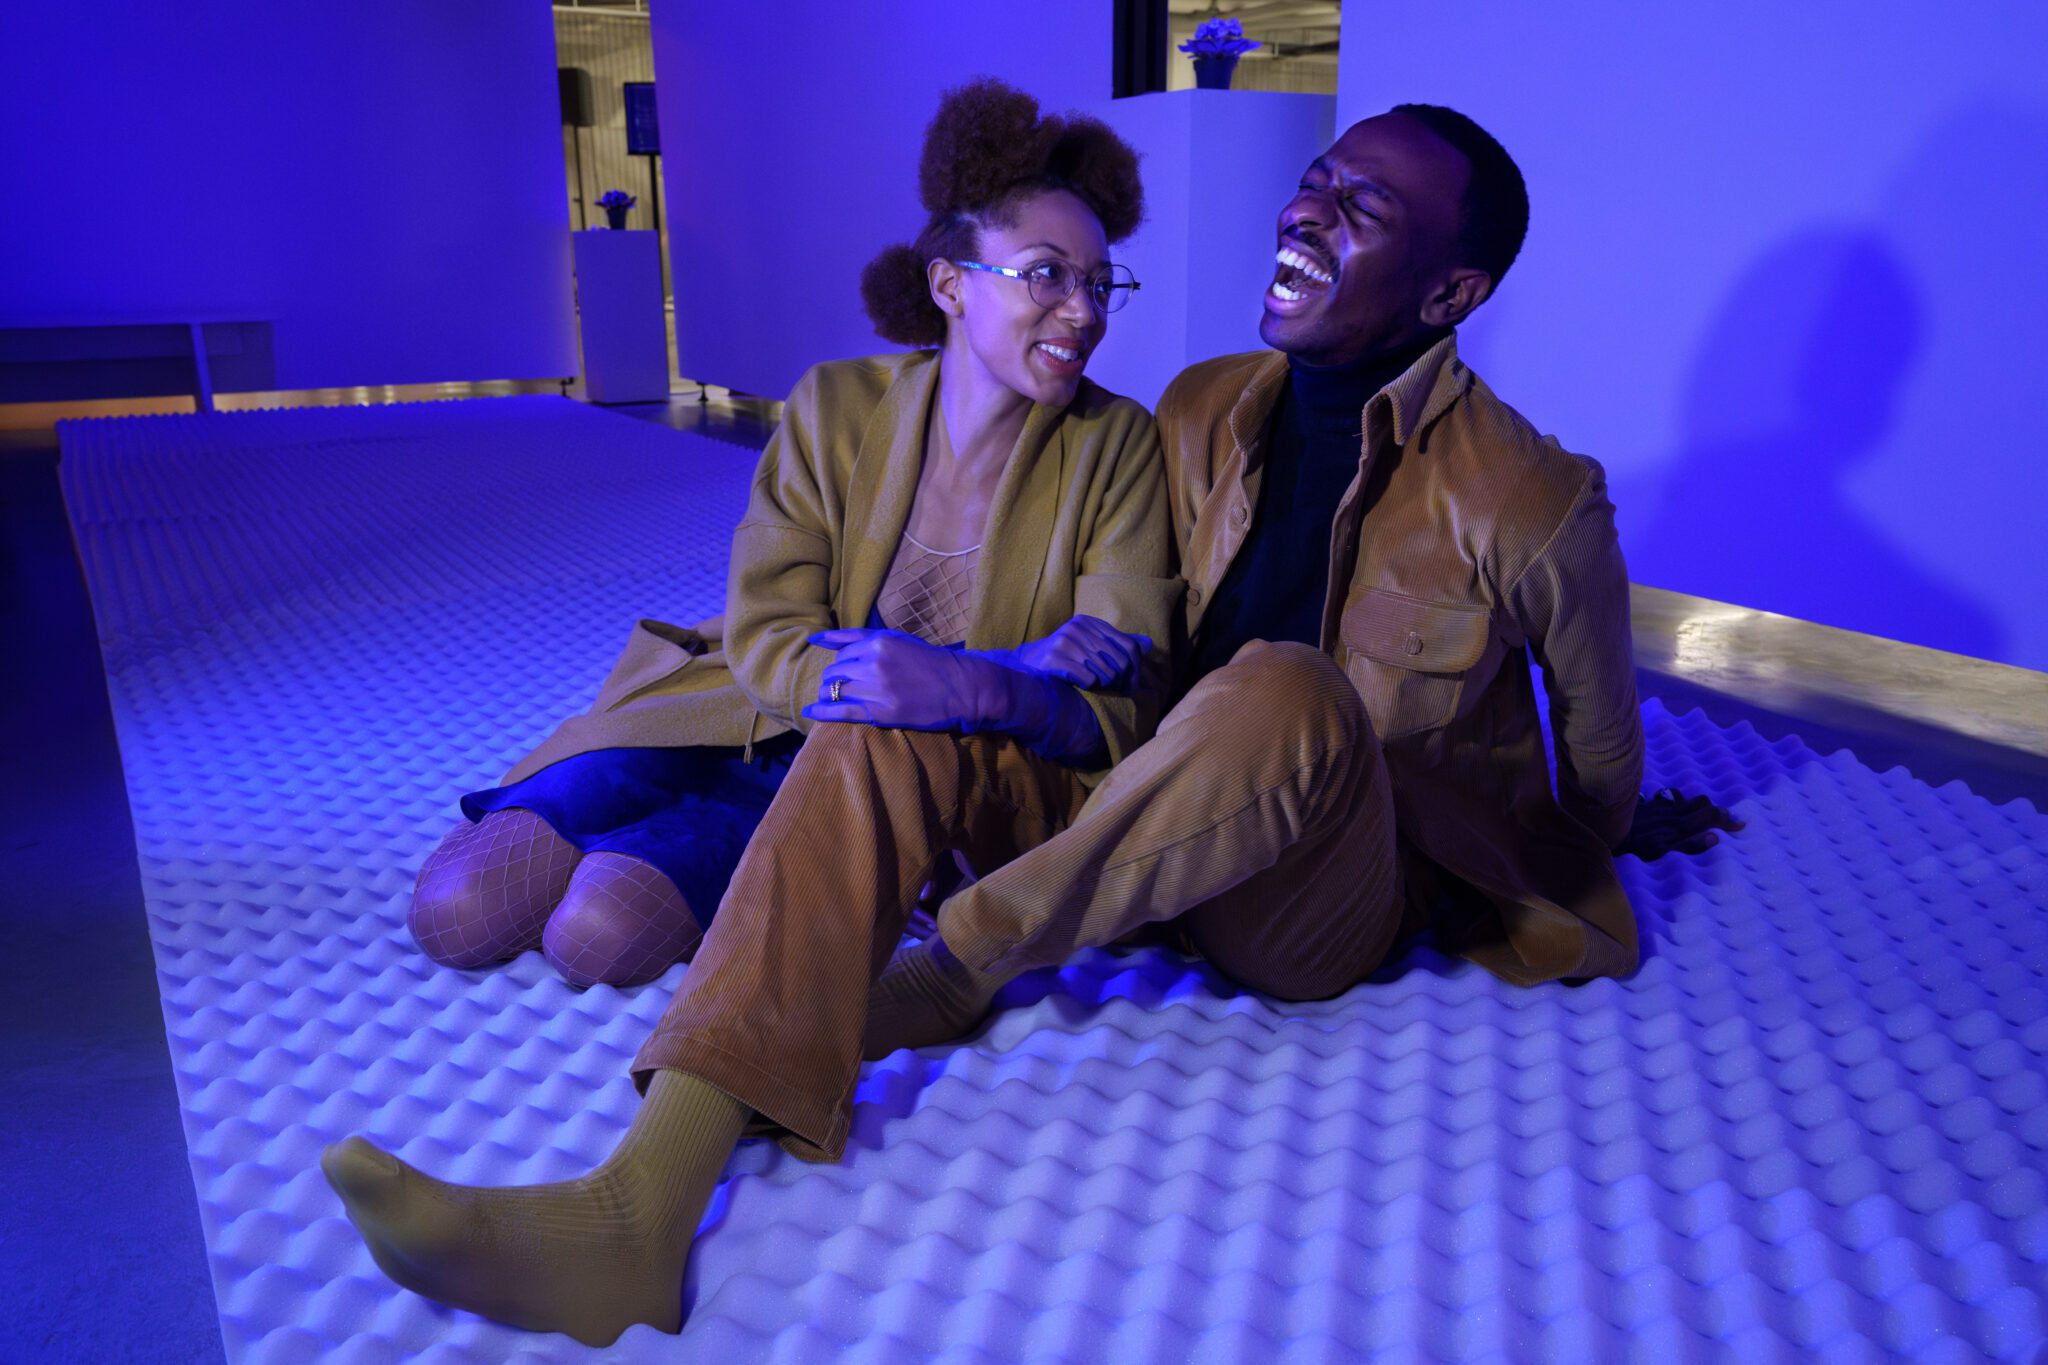 Black woman and Black man sitting together and laughing. Sitting on white foam and background is white walls.